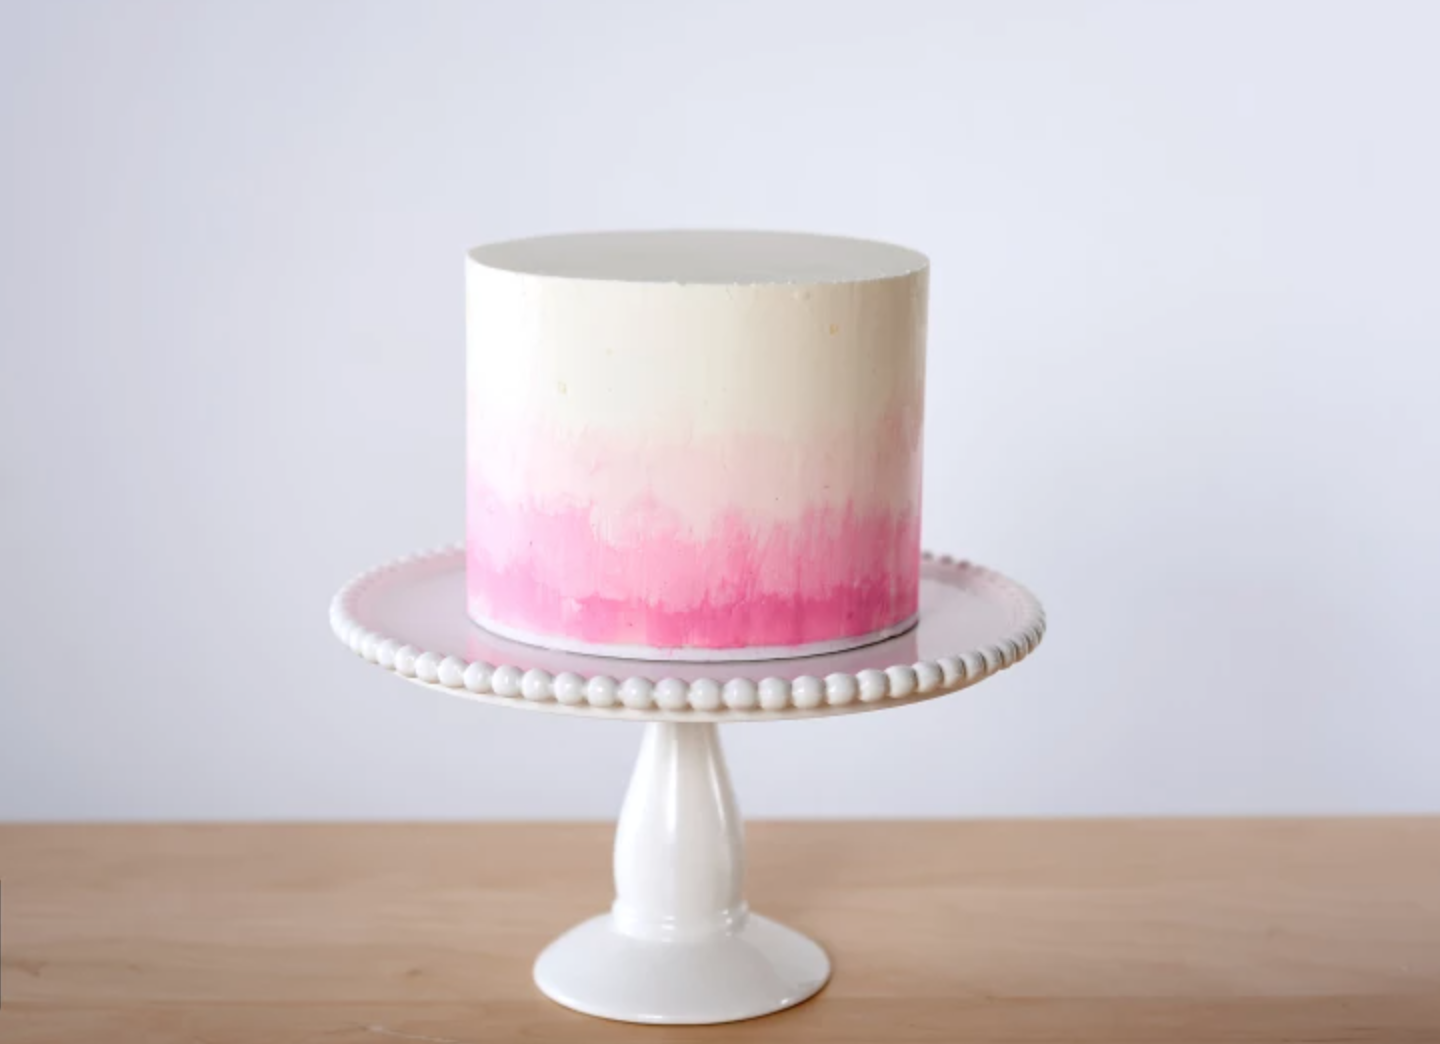 Ombre Cakes | The Cake Blog